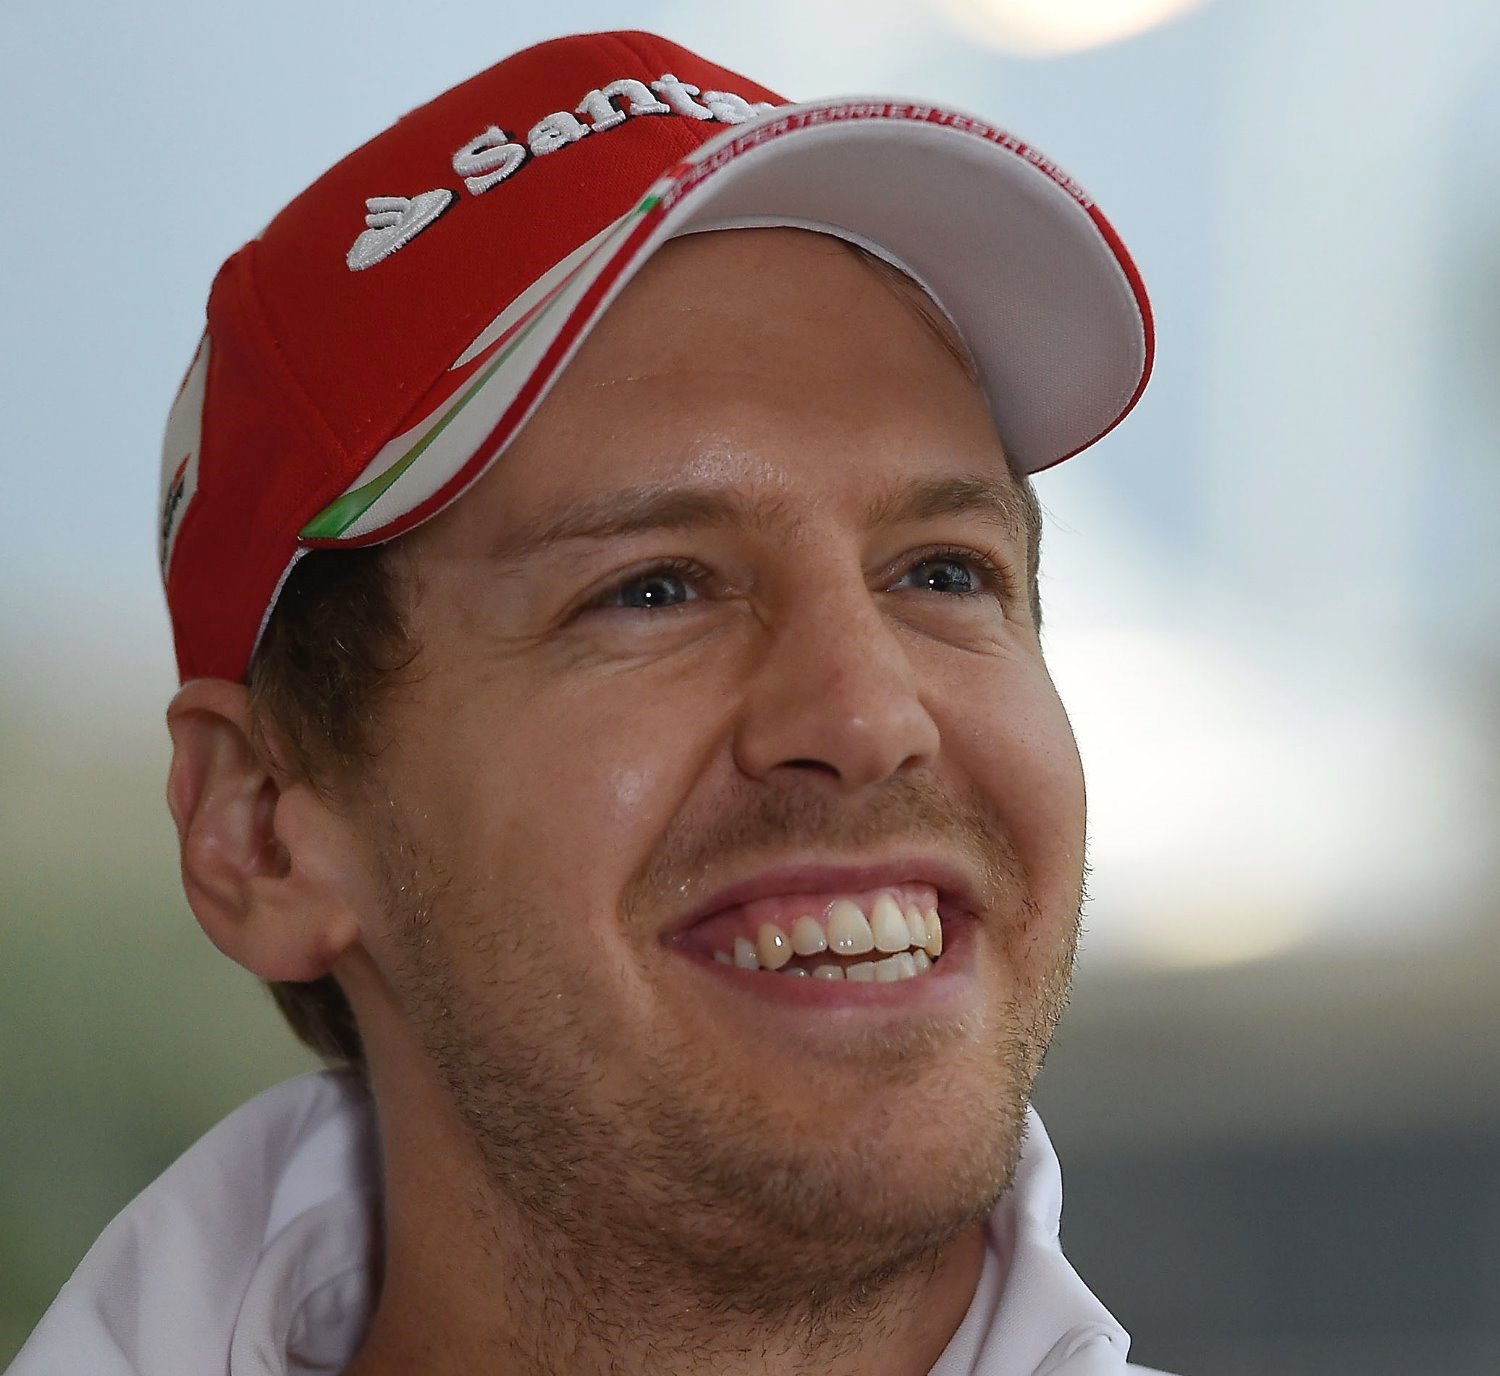 Vettel will do at least 3 more years and then decide